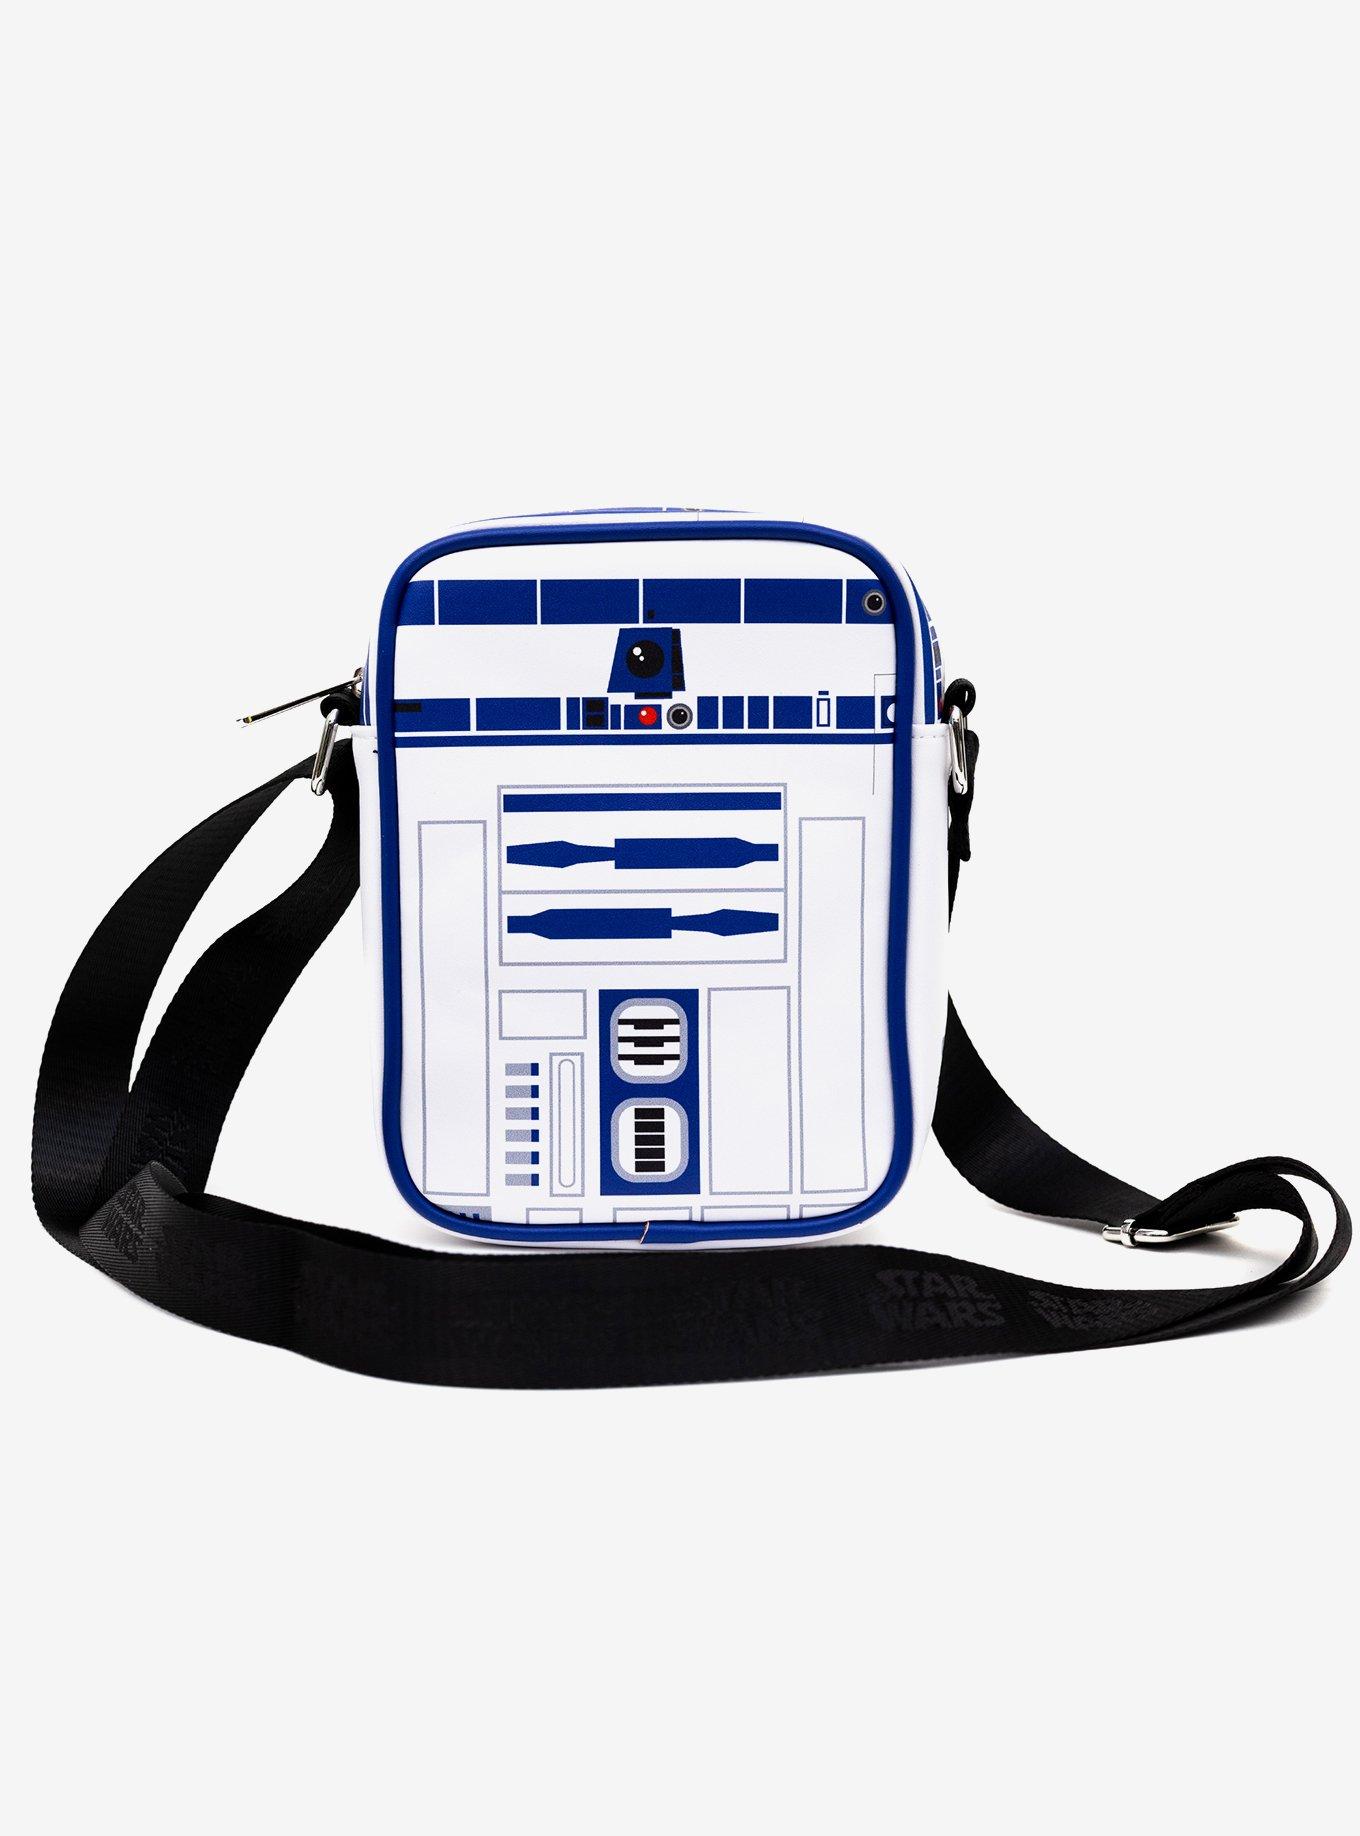 Star Wars R2-D2 Droid Crossbody Bag and Wallet